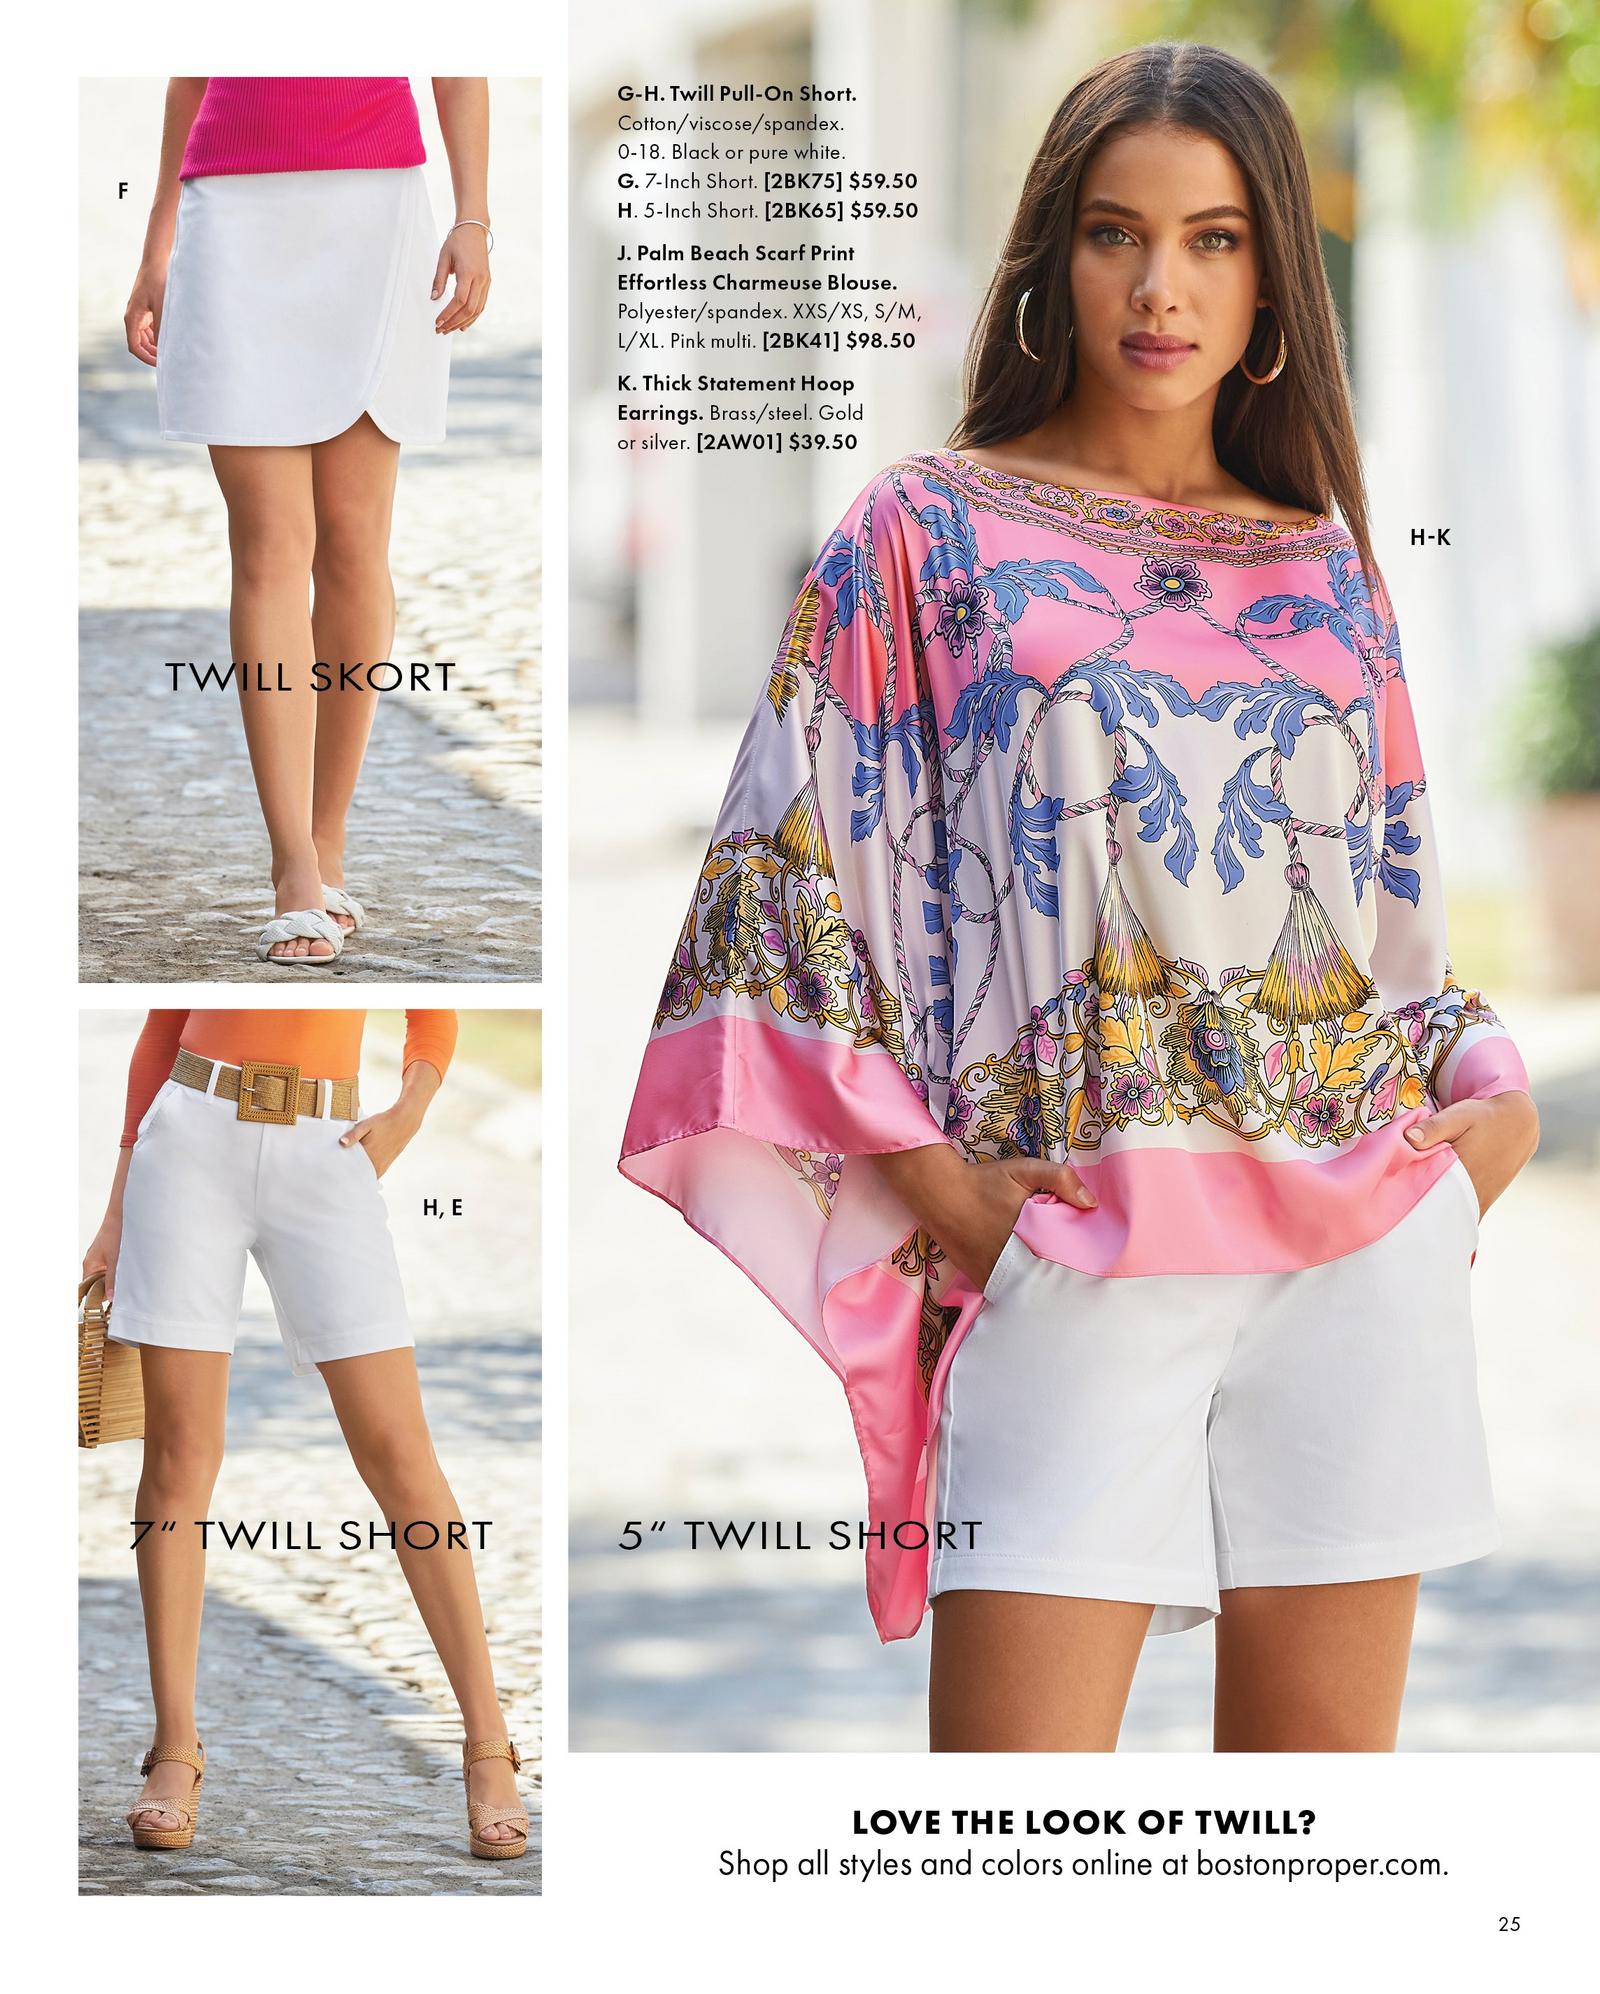 top left model wearing a white skort, pink top, and white braided sandals. bottom left model wearing white shorts, raffia belt, orange top, and raffia wedges. right model wearing a scarf print charmeuse blouse, white twill shorts, and gold hoop earrings.